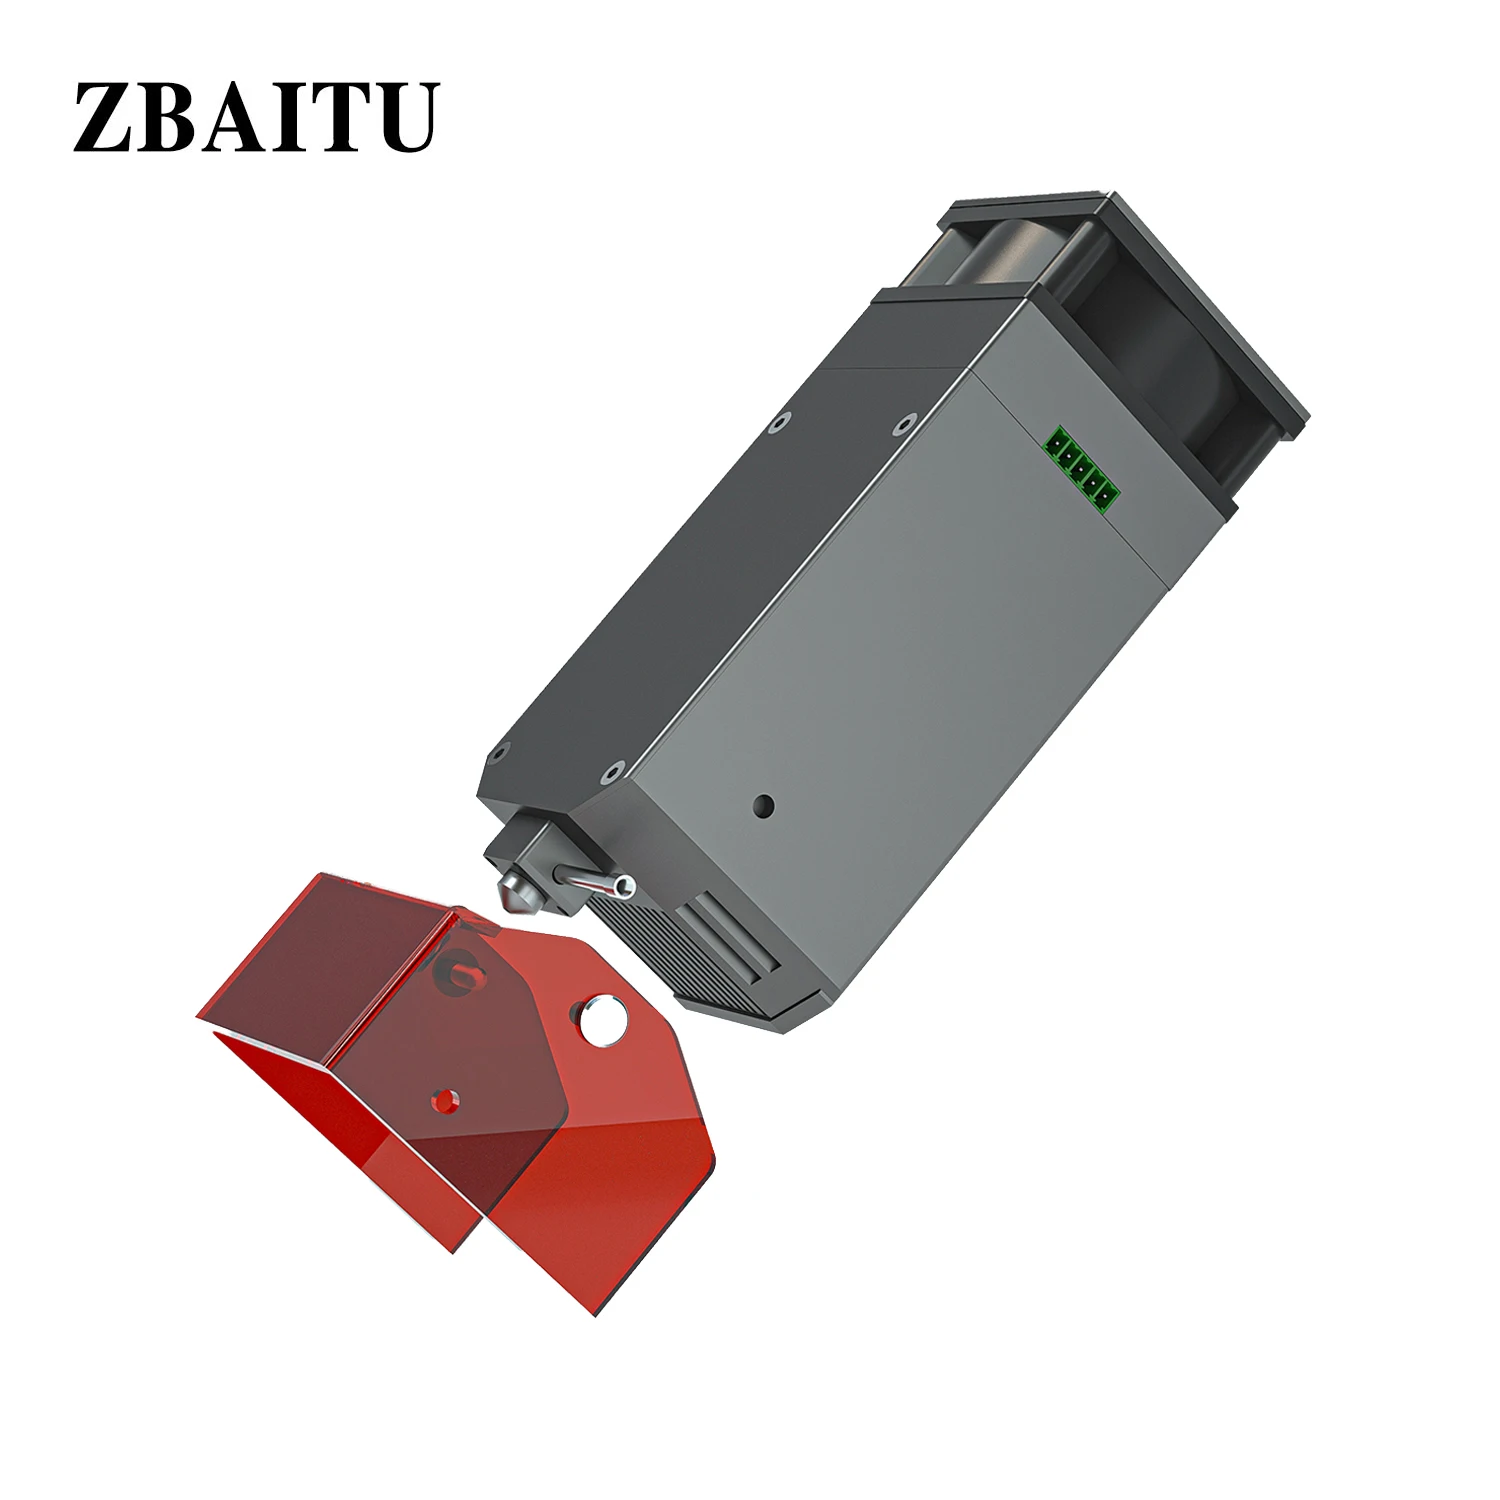 ZBAITU FF100 15W 3 Diode Air Assisted Laser Head Laser Module For CNC Laser Engraver DIY Wood Engraving Machine Router Cutter